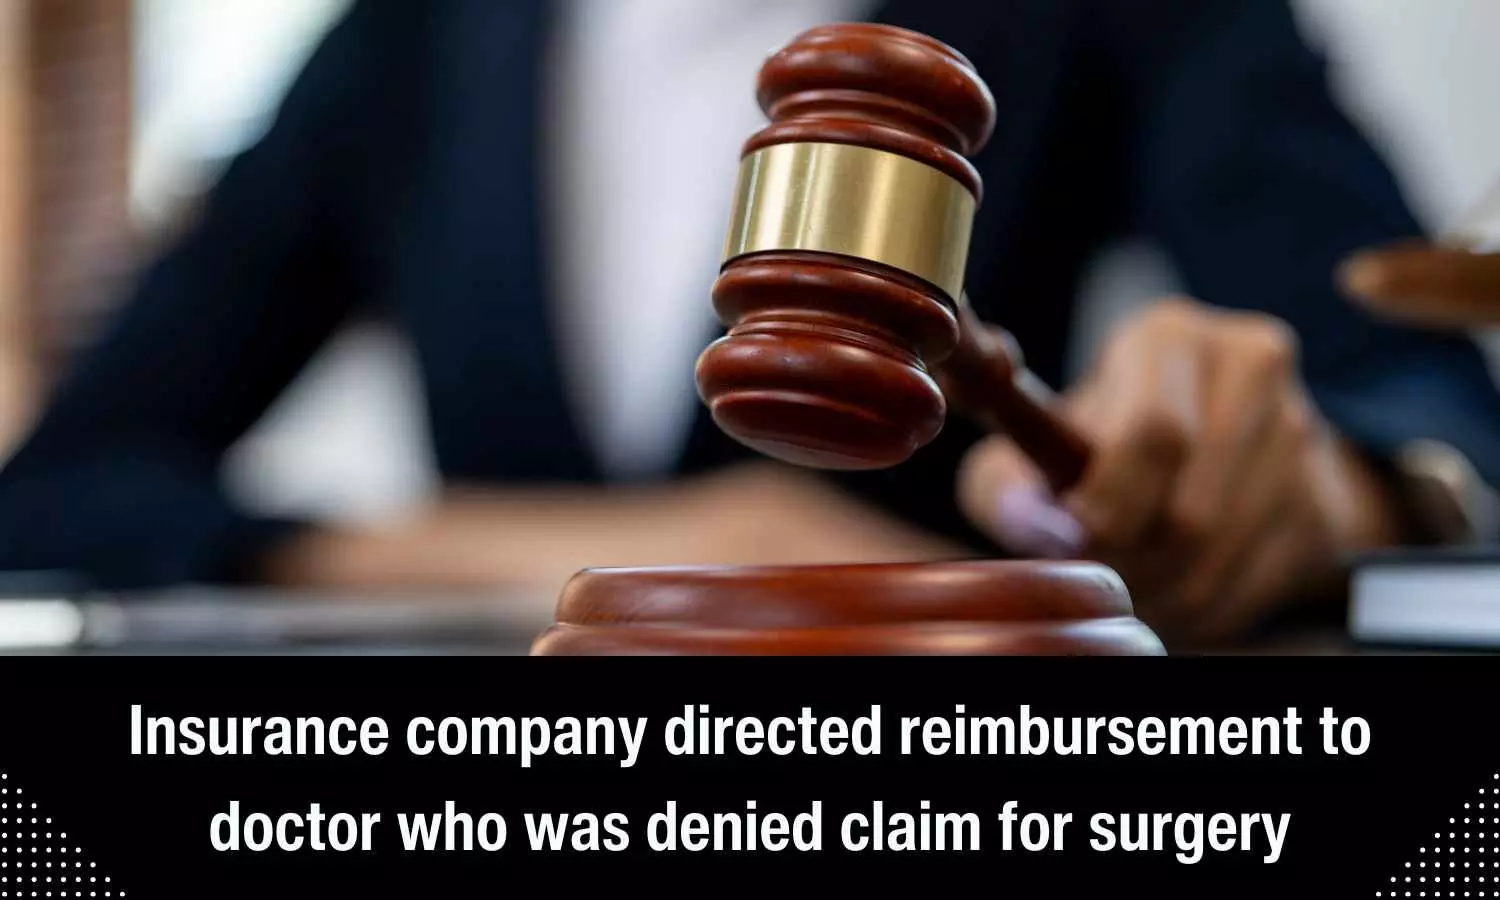 Insurance company directed reimbursement to doctor who was denied claim for surgery